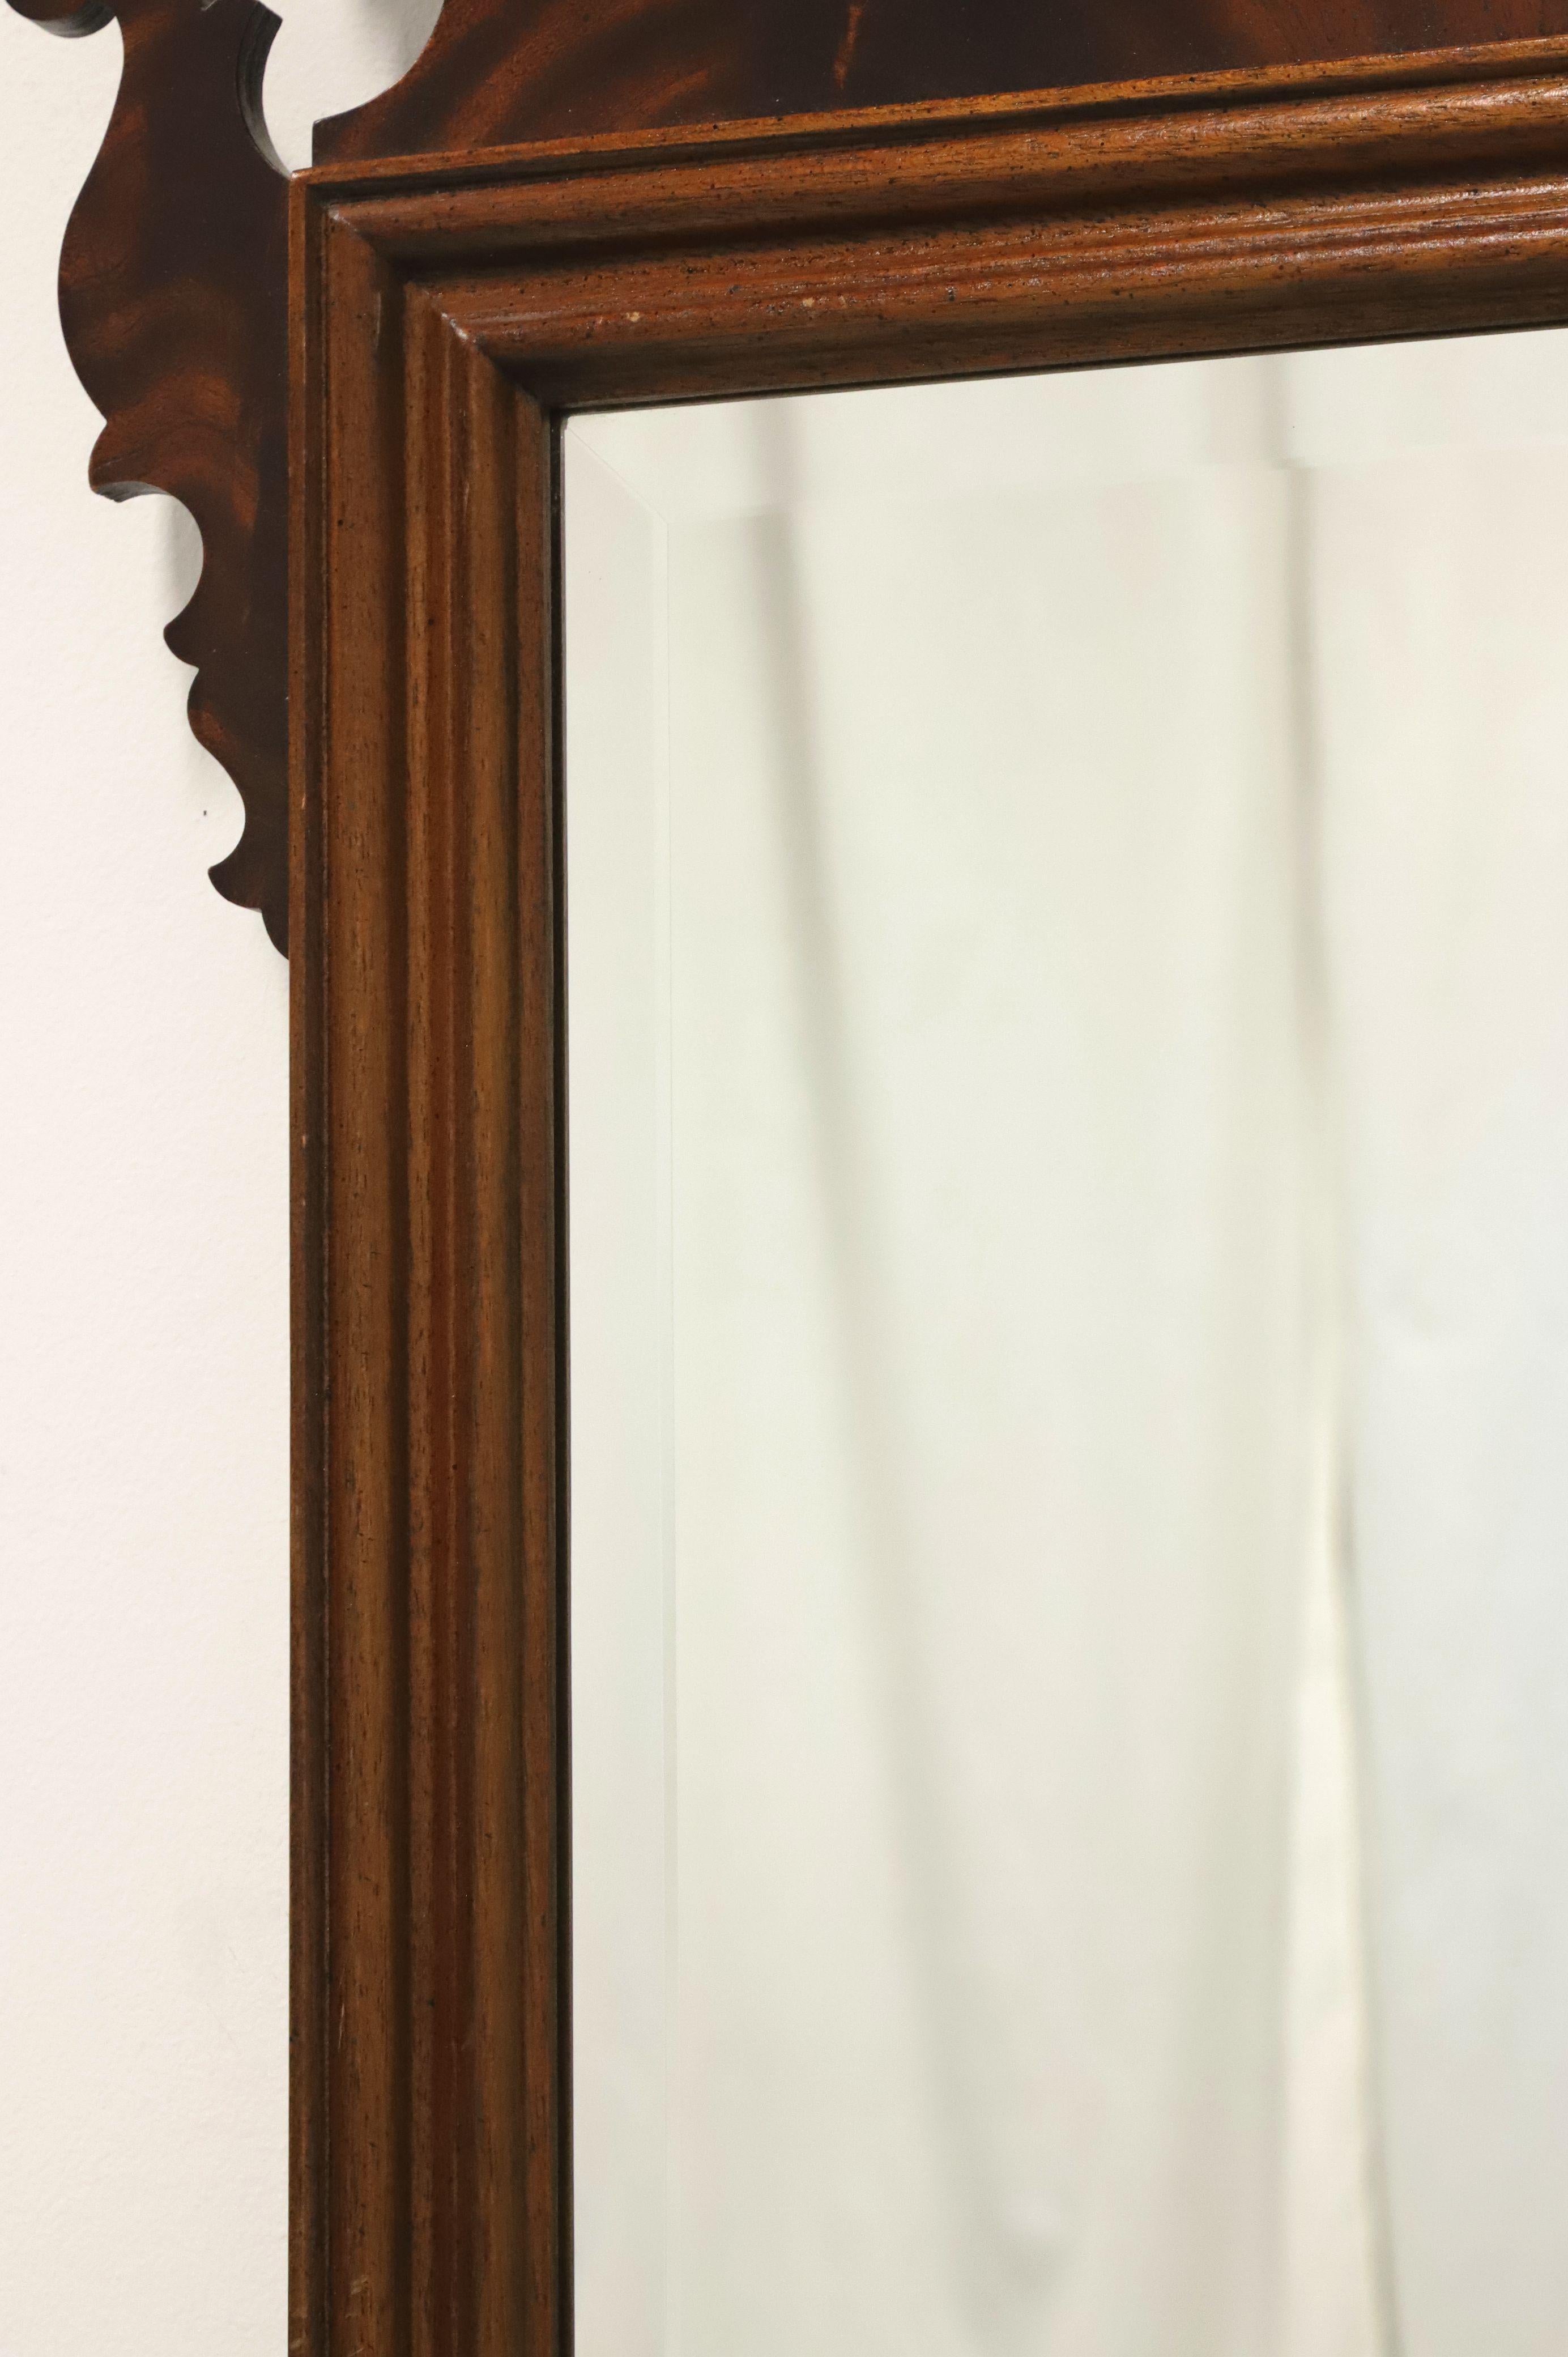 American HEKMAN Crotch Mahogany Chippendale Beveled Wall Mirror For Sale